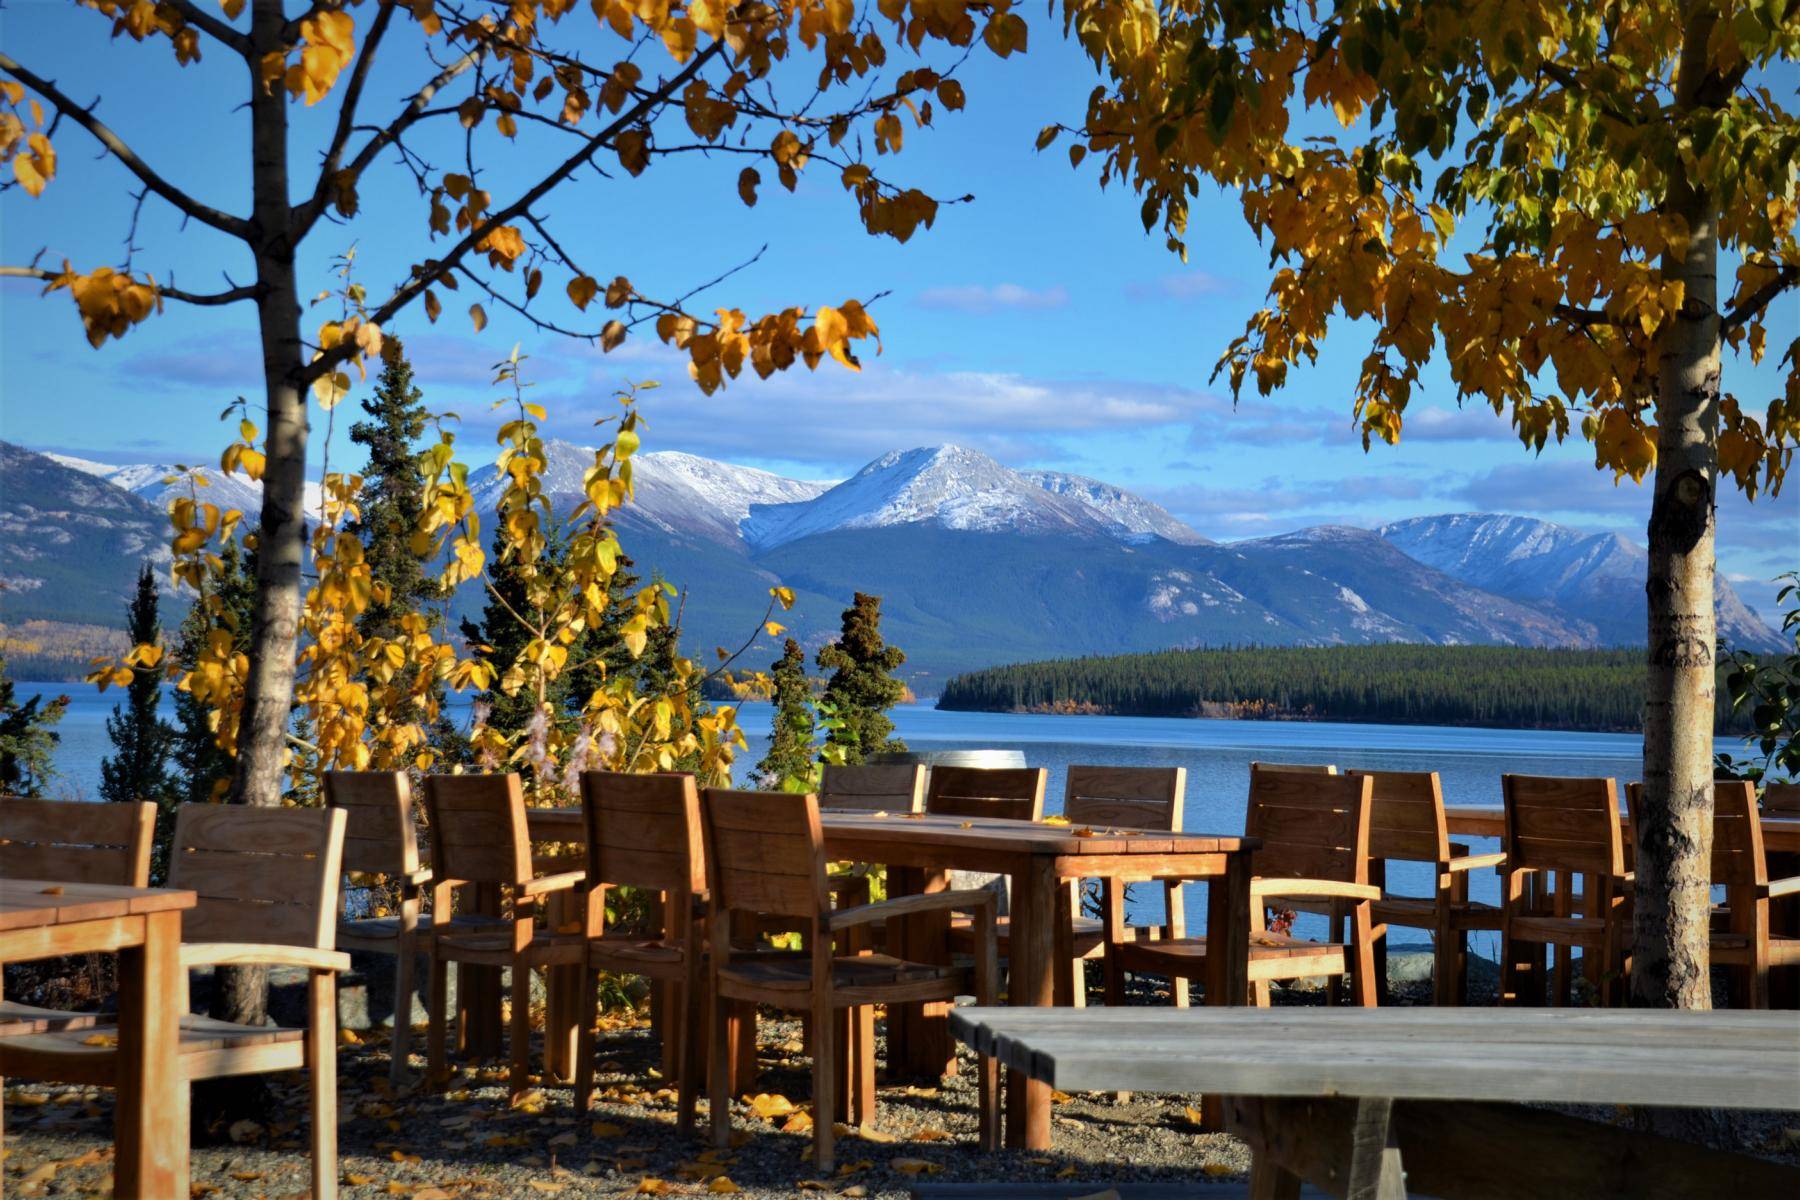 View from the restaurant patio onto the lake and mountains 